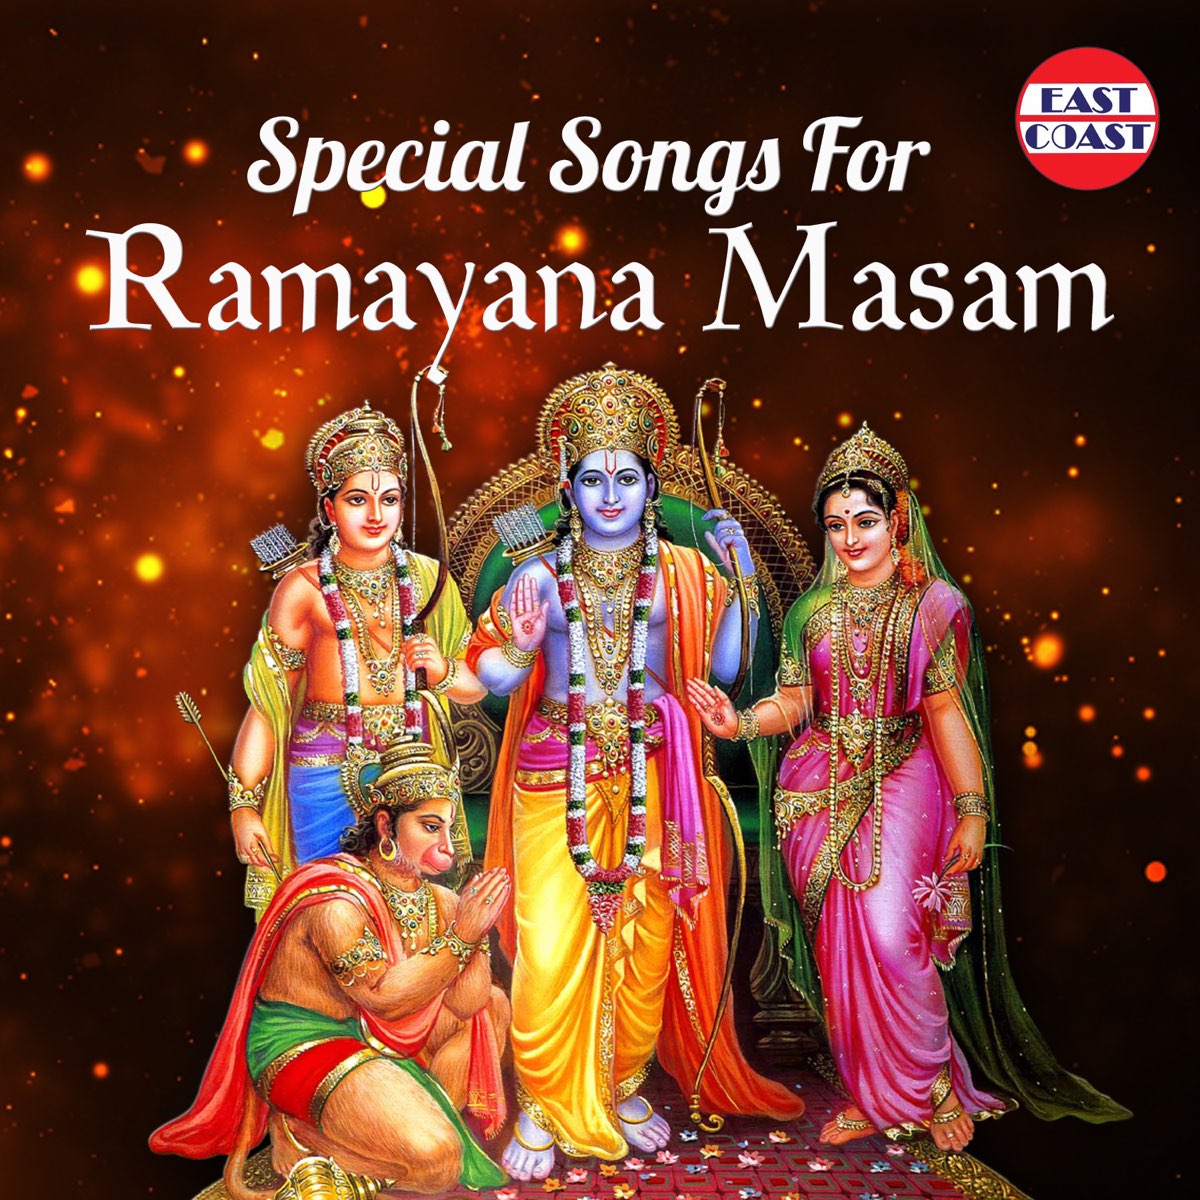 Special Songs For Ramayana Masam by Vidhyadharan & Kavalam ...